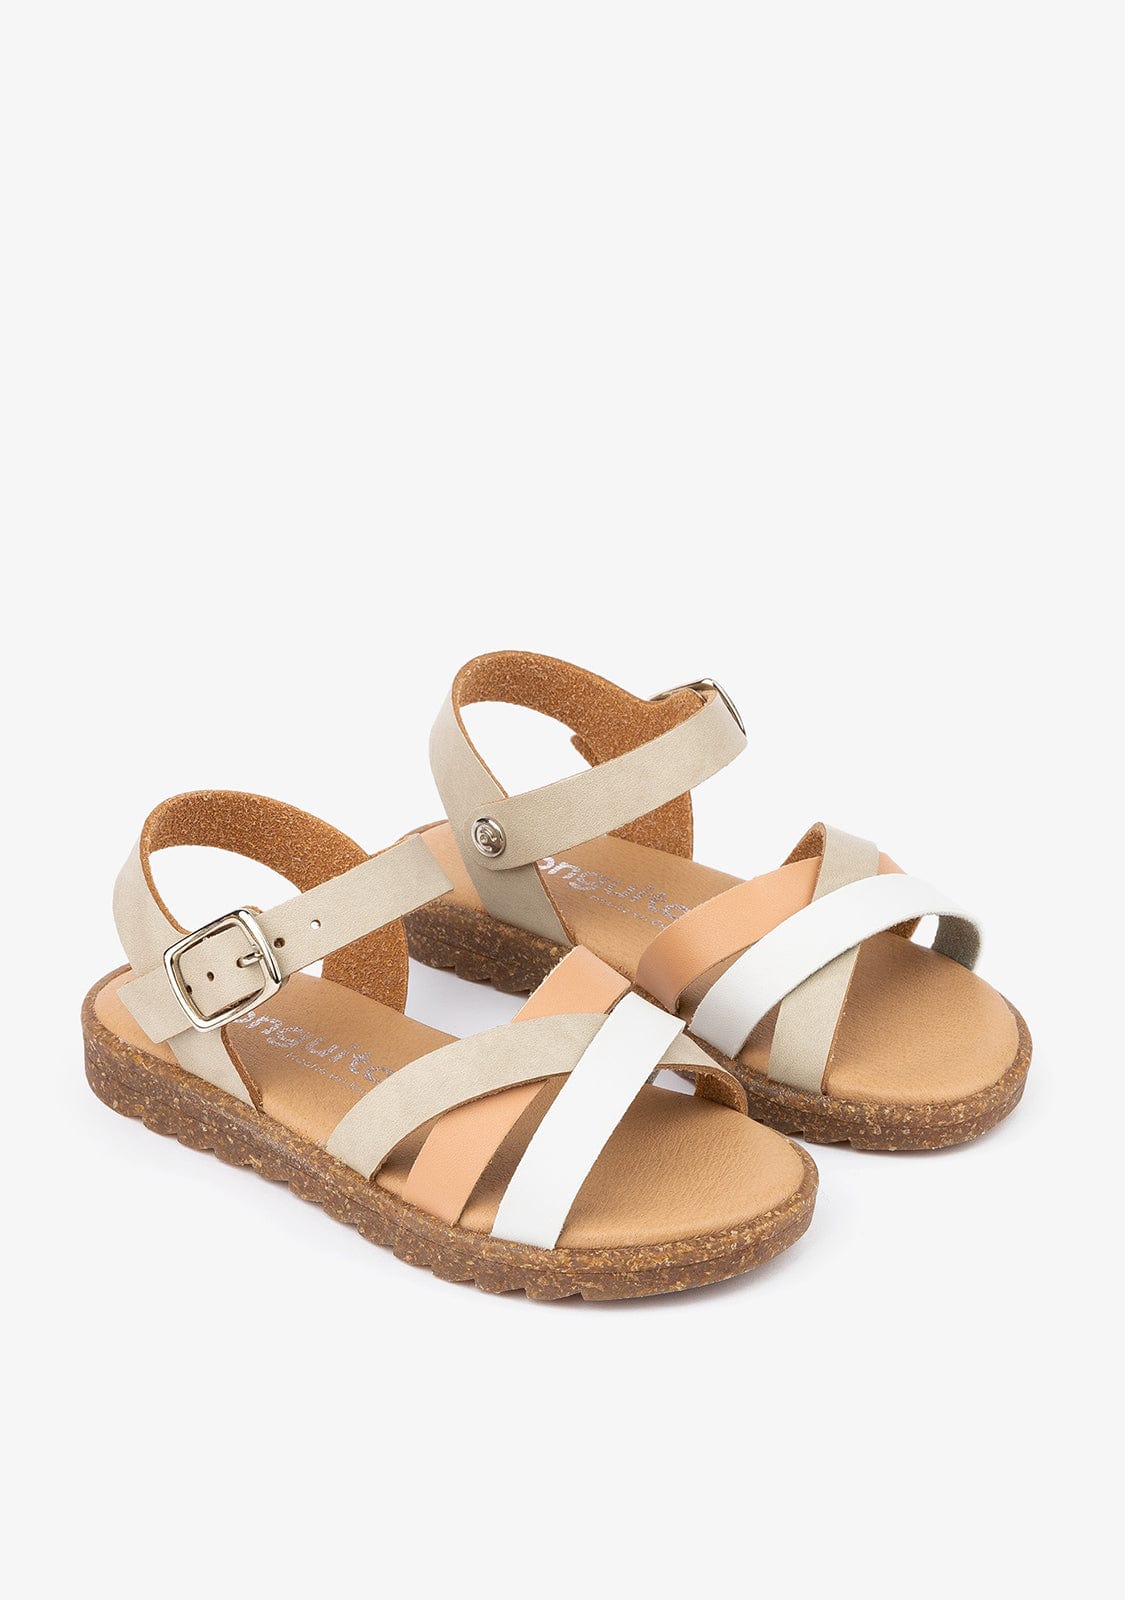 CONGUITOS Shoes Girl's Taupe Straps Multi Sandals Leather